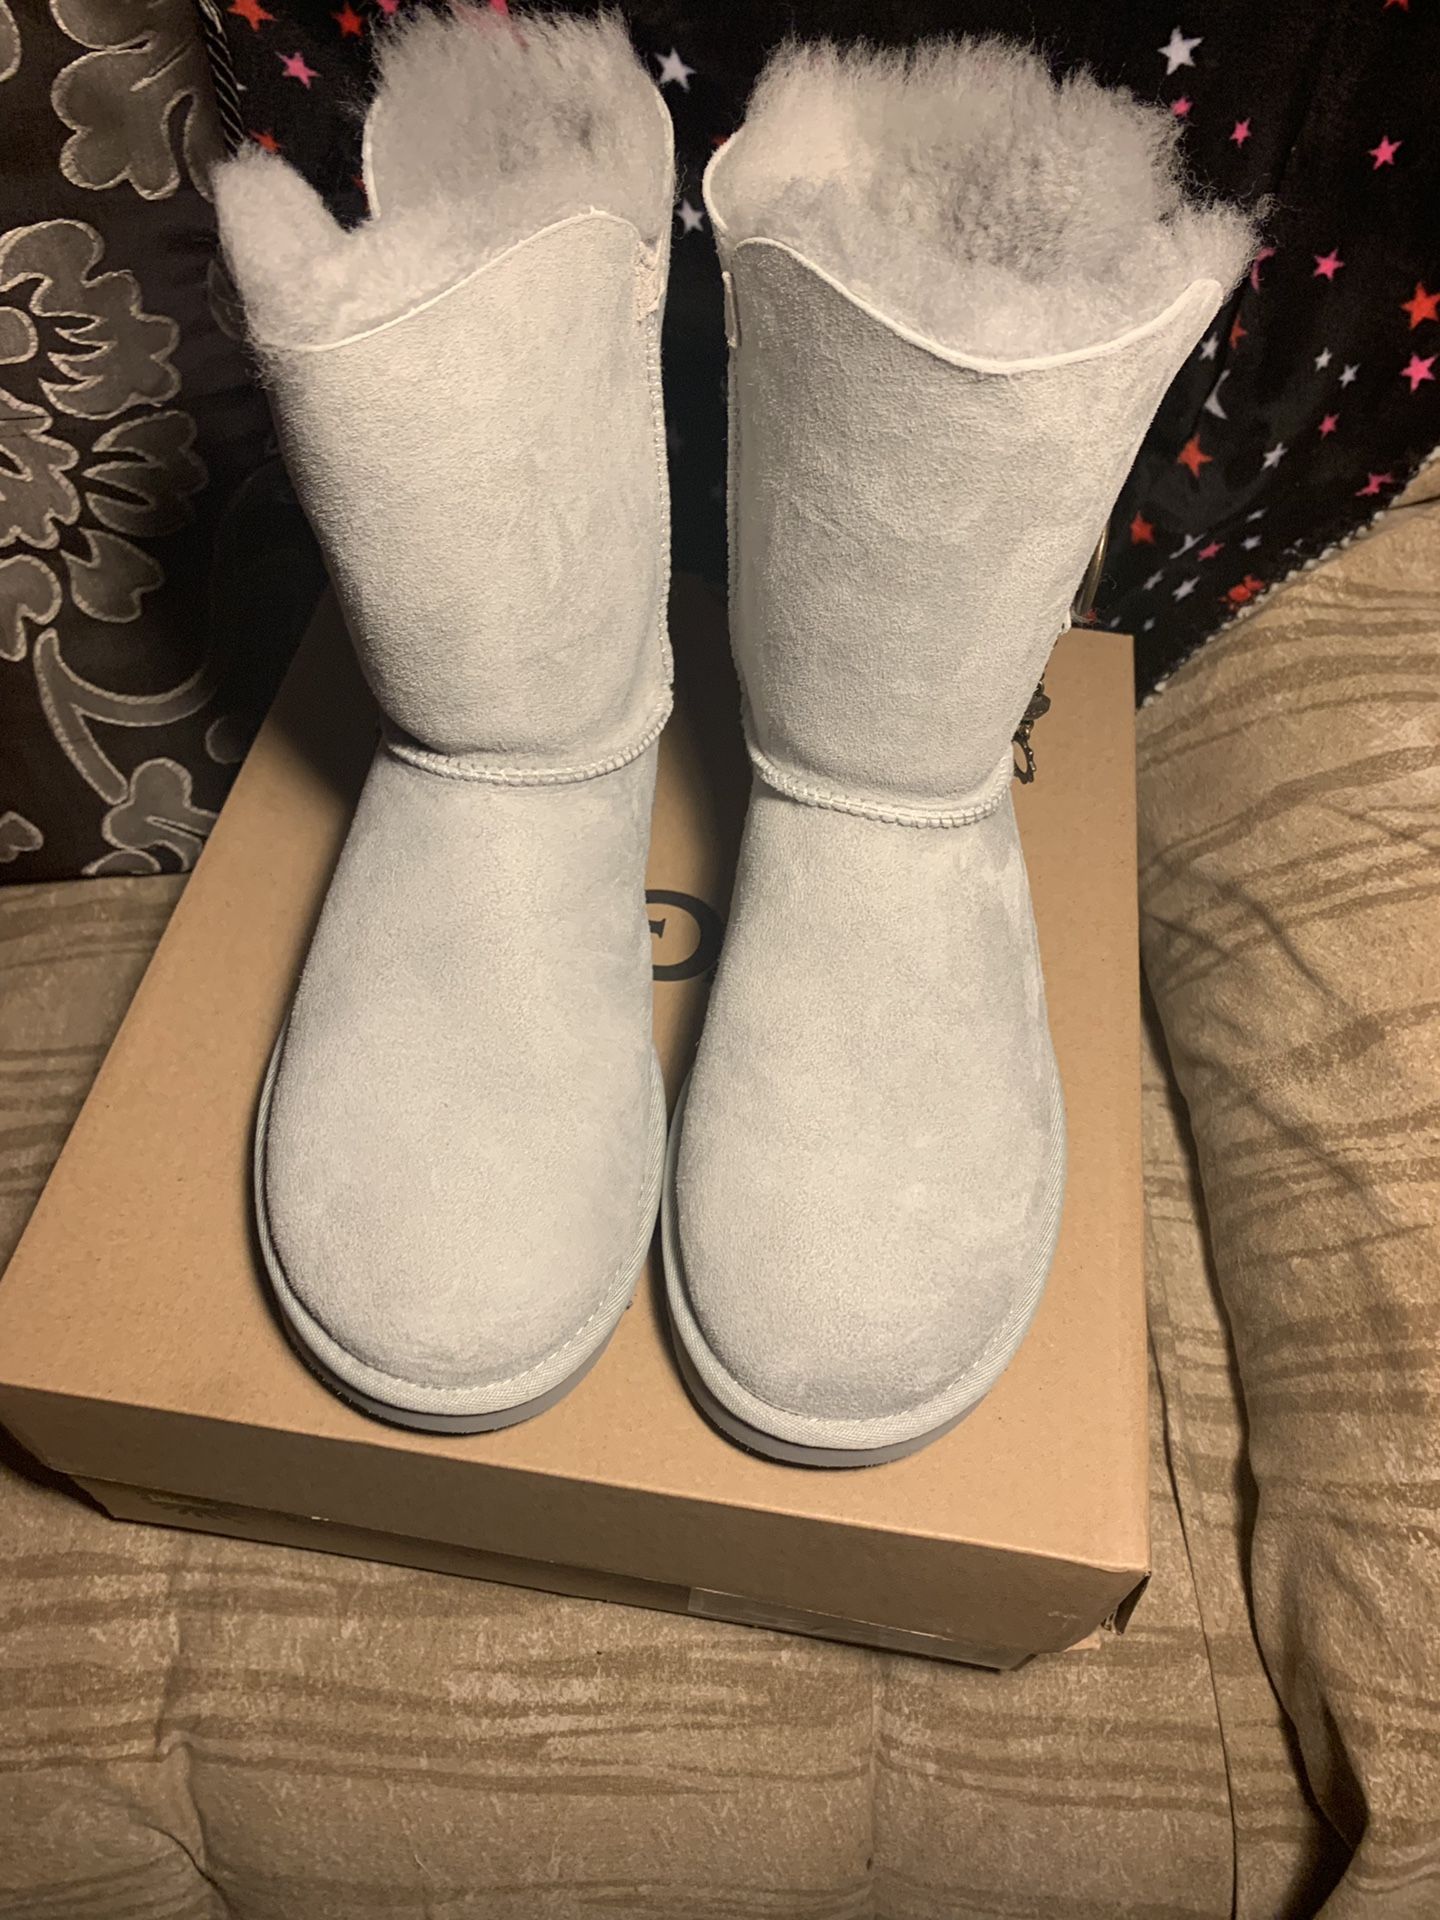 New and authentic Ugg Boots color Gray size 7